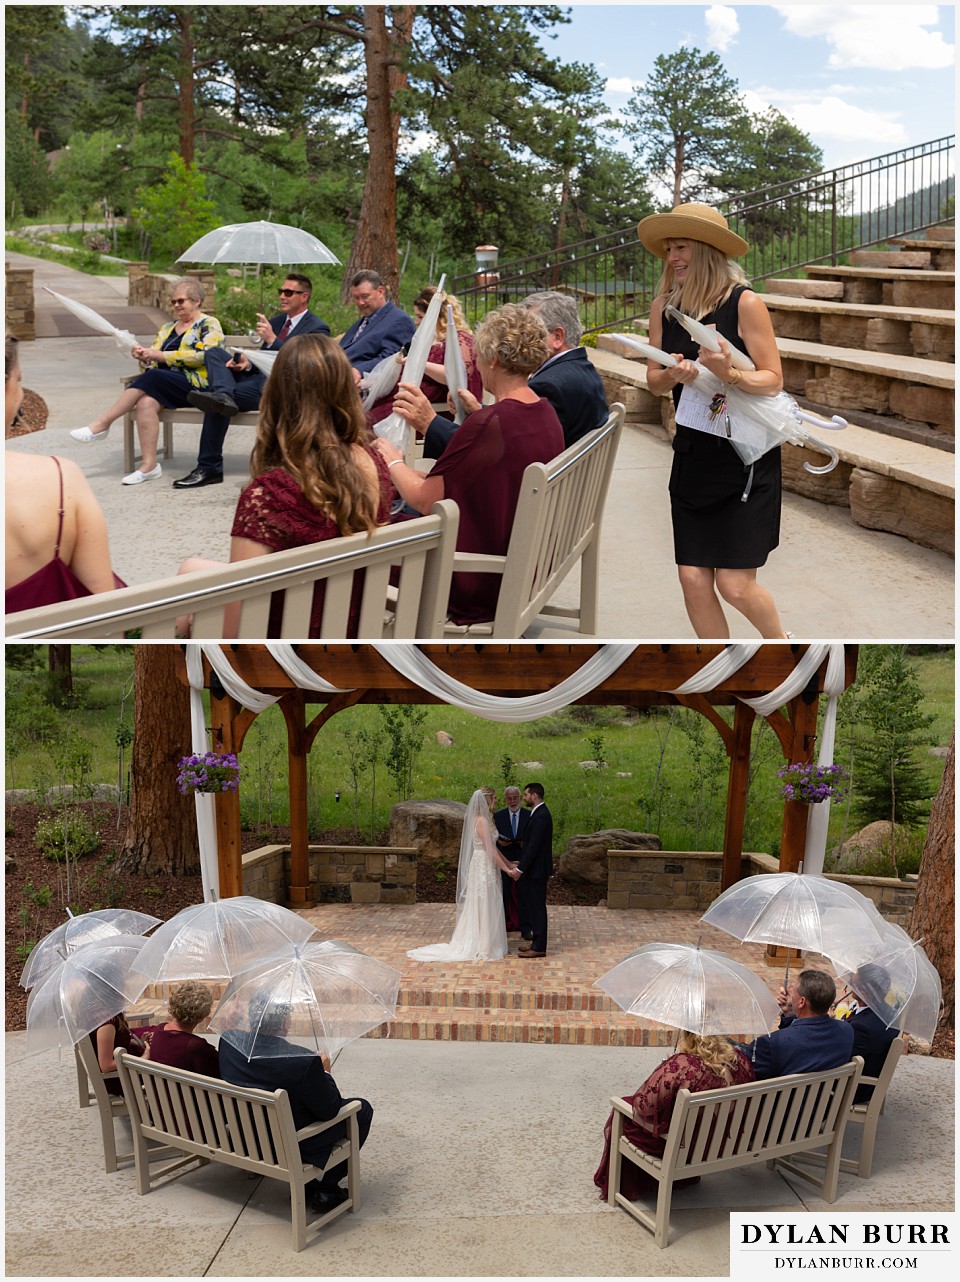 della terra mountain chateau wedding colorado rocky mountain national park wedding rmnp elopement handing out umbrellas for the incoming rain wide view showing guests with clear umbellas for the rain during full sun